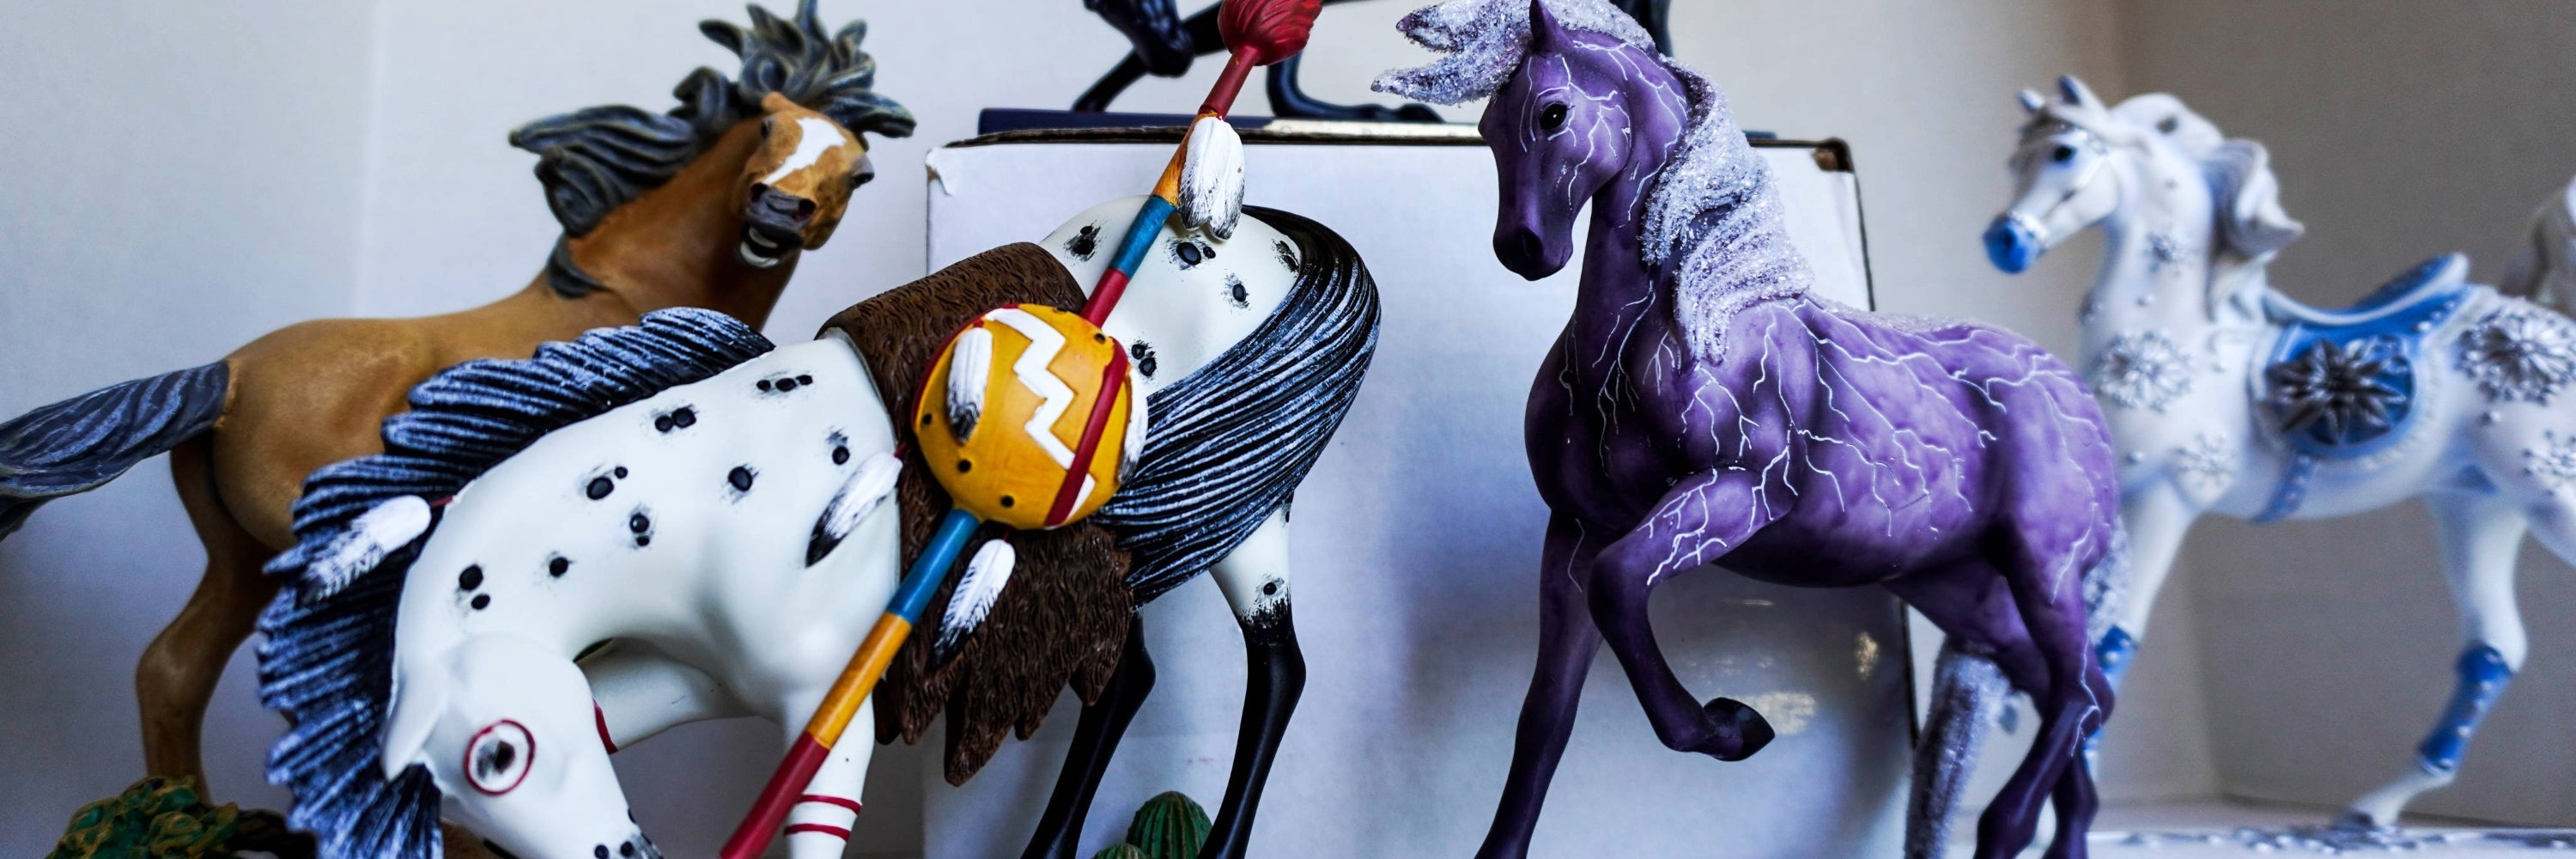 Huge selection of high value Trail of Painted Ponies Figurines 